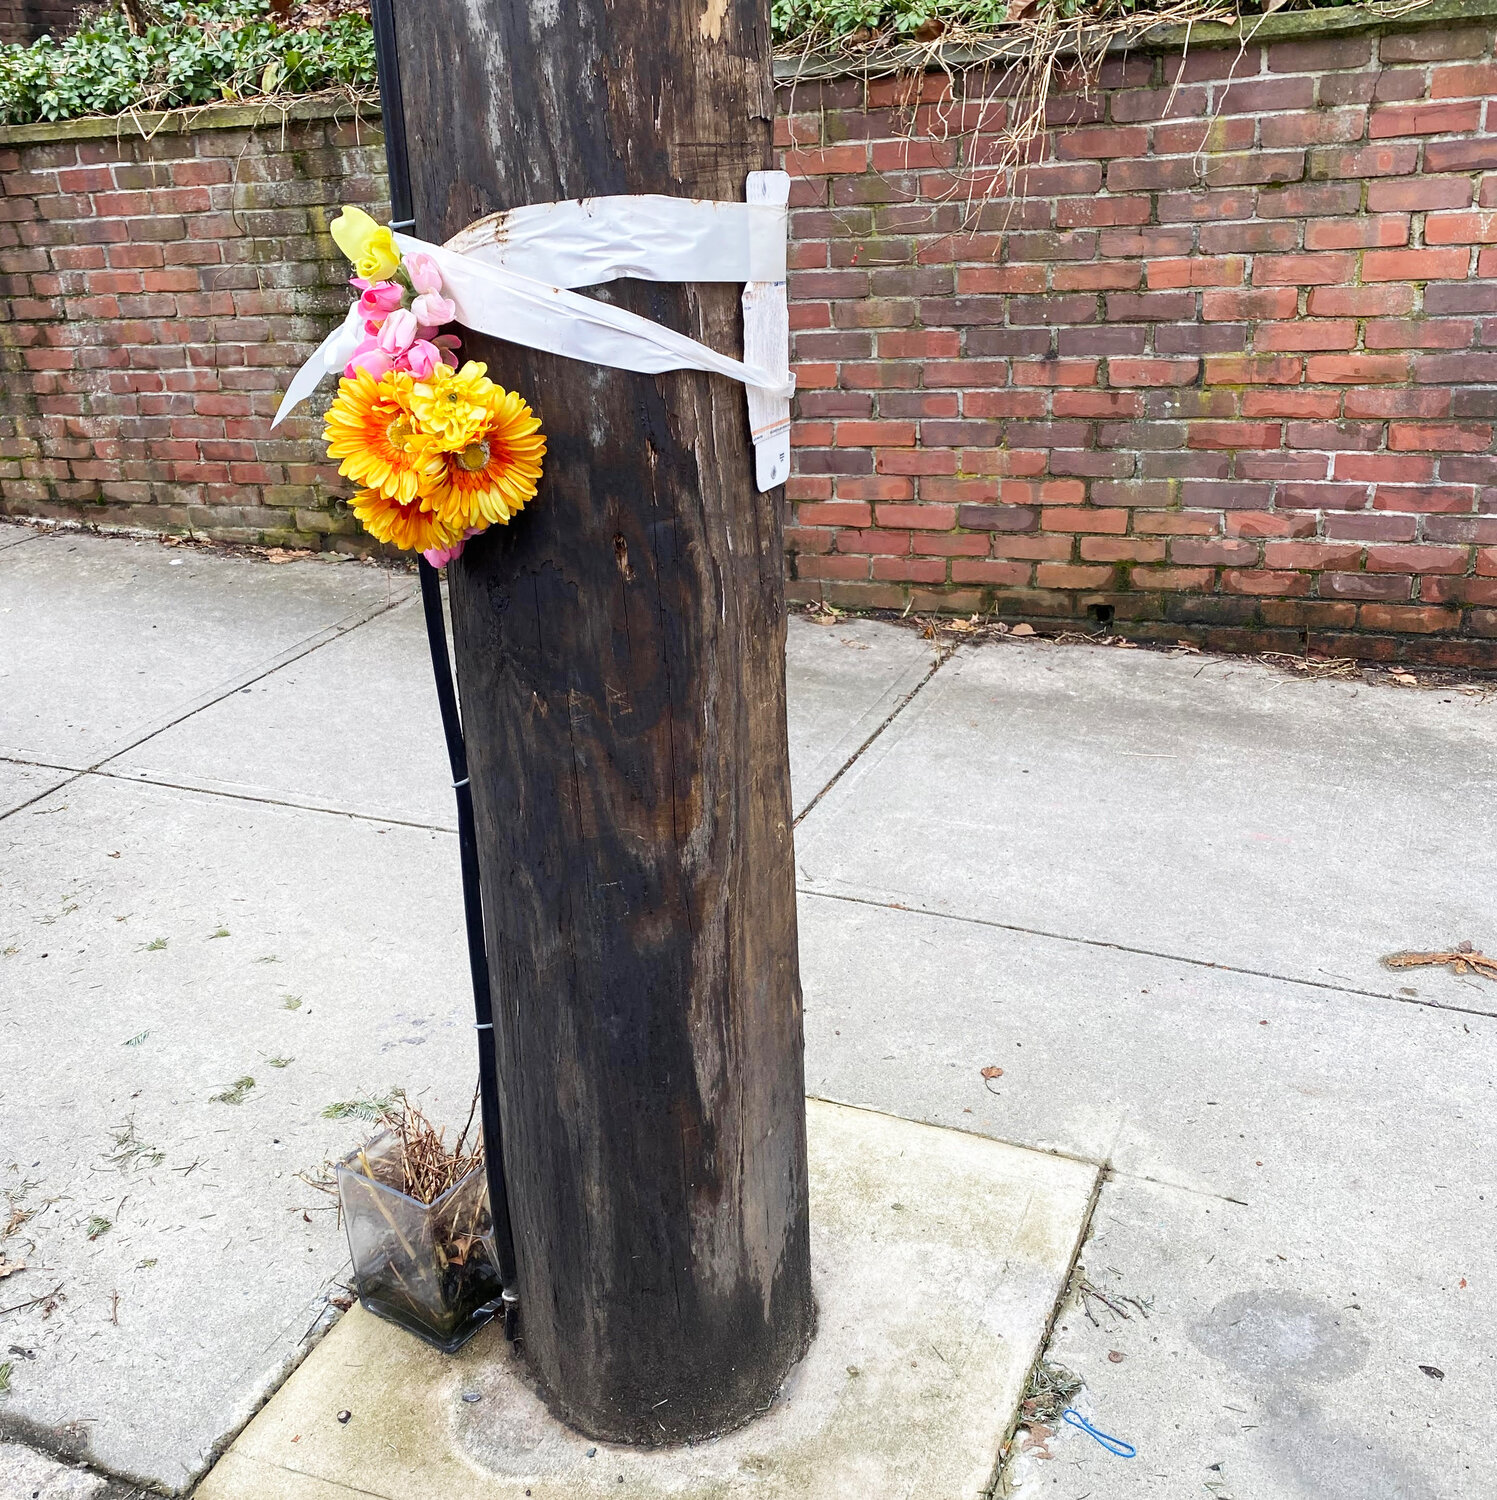 The impromptu memorial on Olney Street in Providence for Miya Brophy-Baermann, who was murdered in a drive-by shooting in 2021.